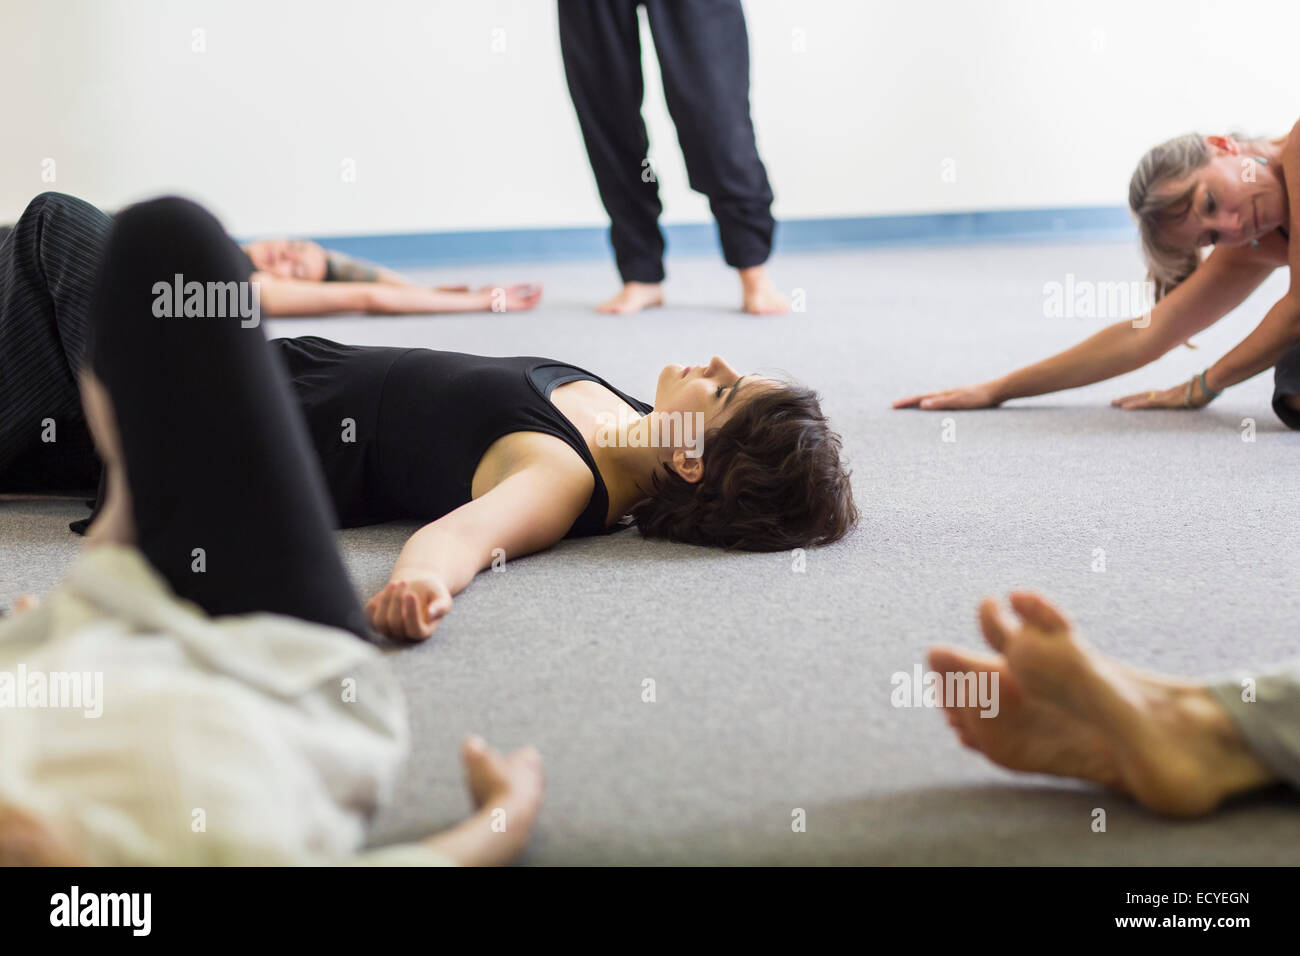 Students stretching in acting class Stock Photo